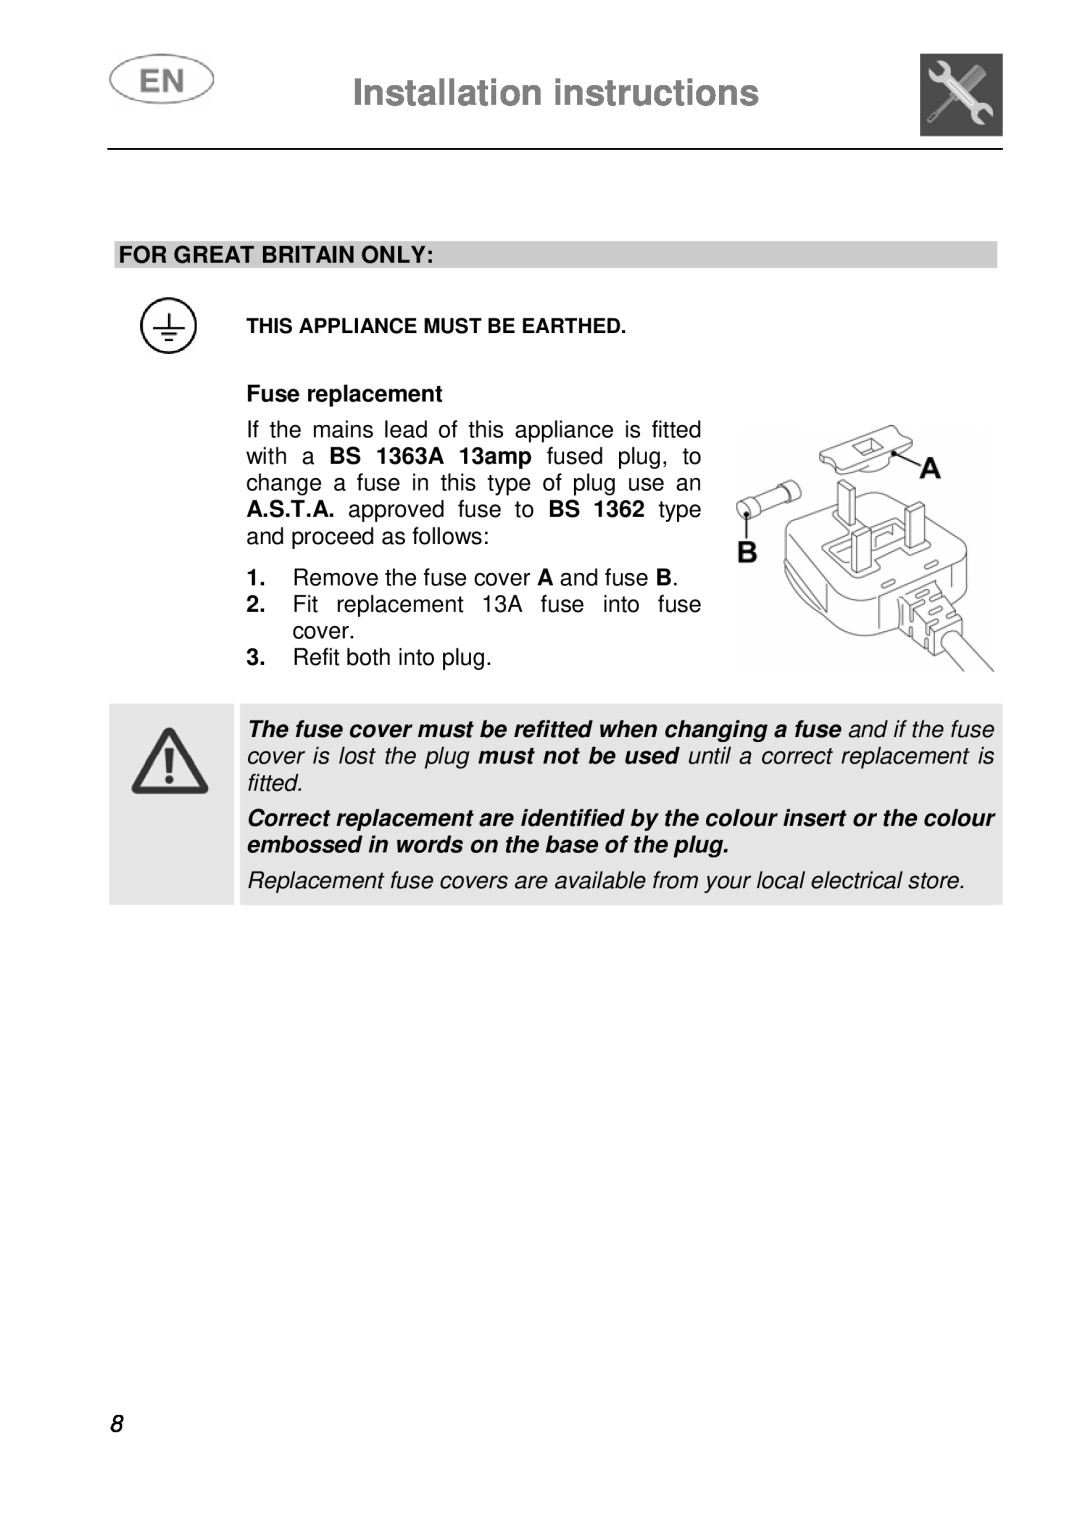 Smeg LSA14X7 instruction manual Installation instructions, For Great Britain Only, Fuse replacement 